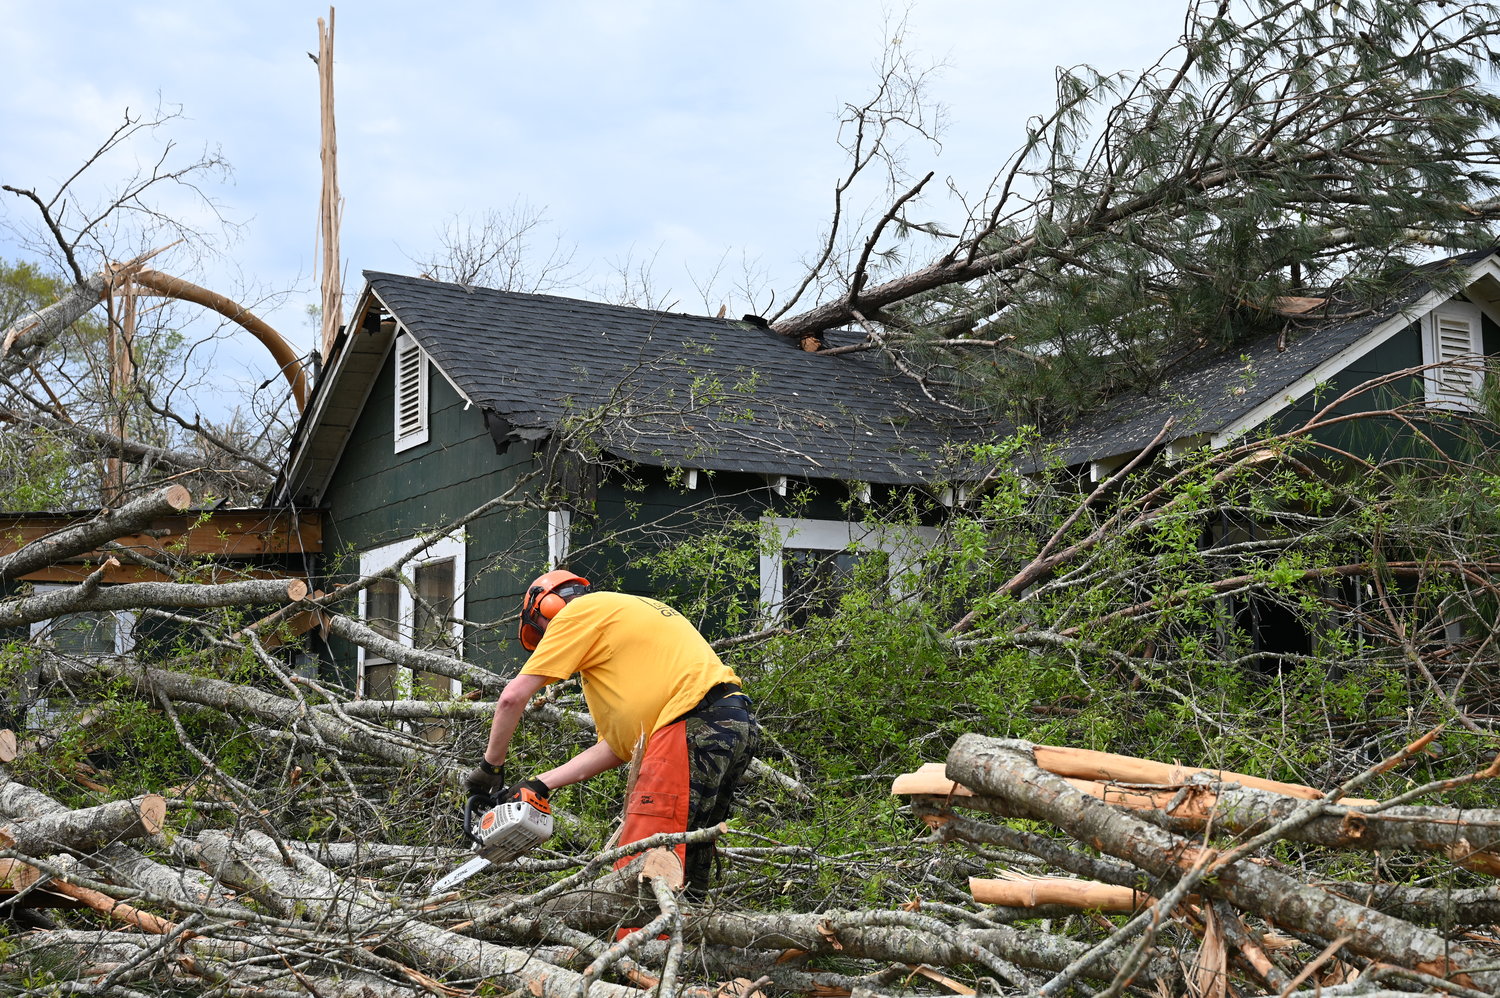 A Georgia Baptist Disaster Relief volunteer saws away down trees from a home in West Point, Ga., on Tuesday, March 28, 2023. (Index/Roger Alford)